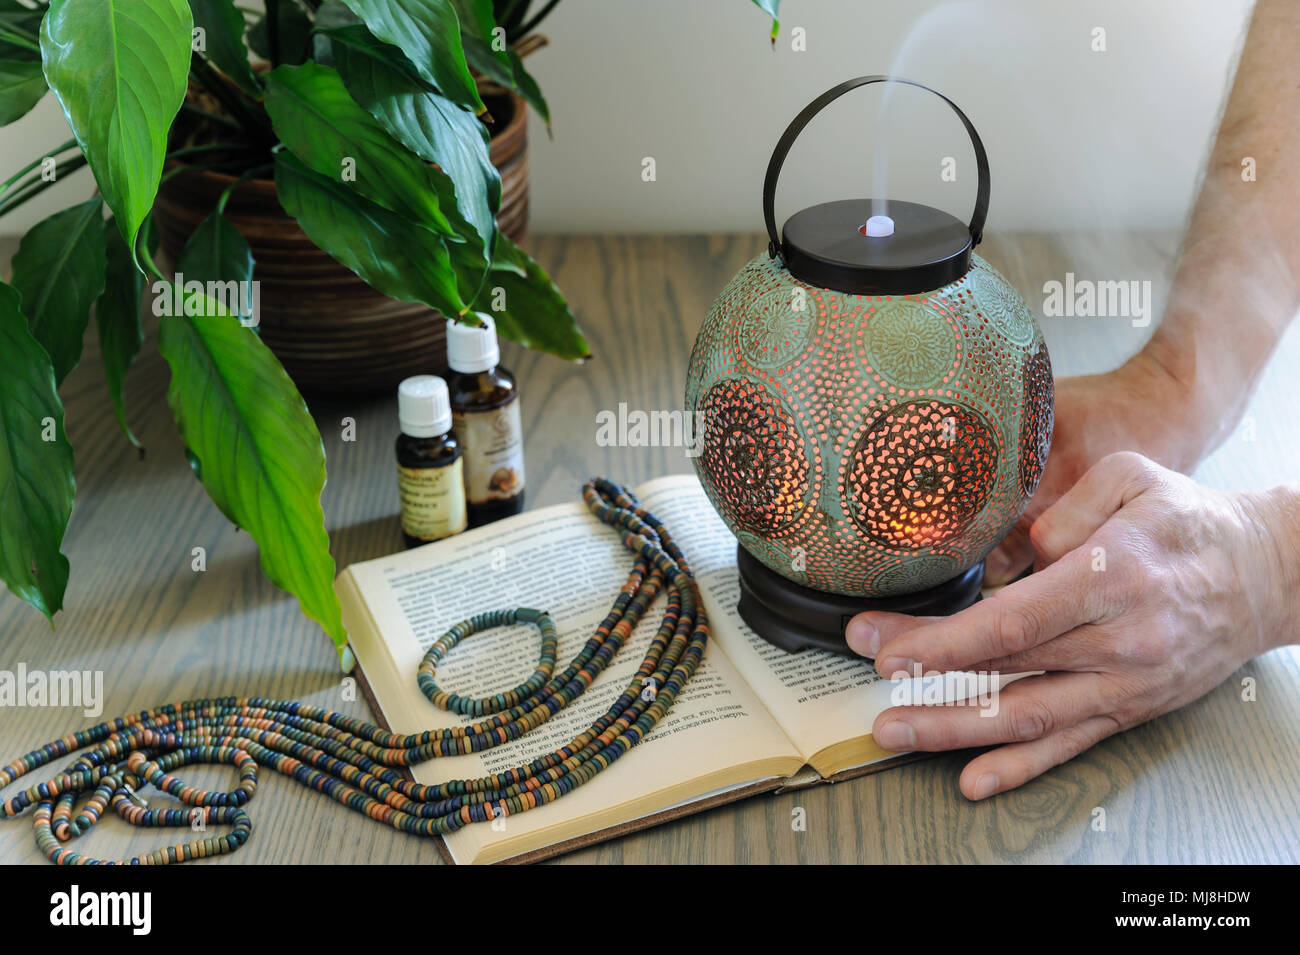 The ultrasonic aroma diffuser is made in the form of an old lamp. Aromatic diffuser is on the wooden table. The man is turning it on. There are essent Stock Photo